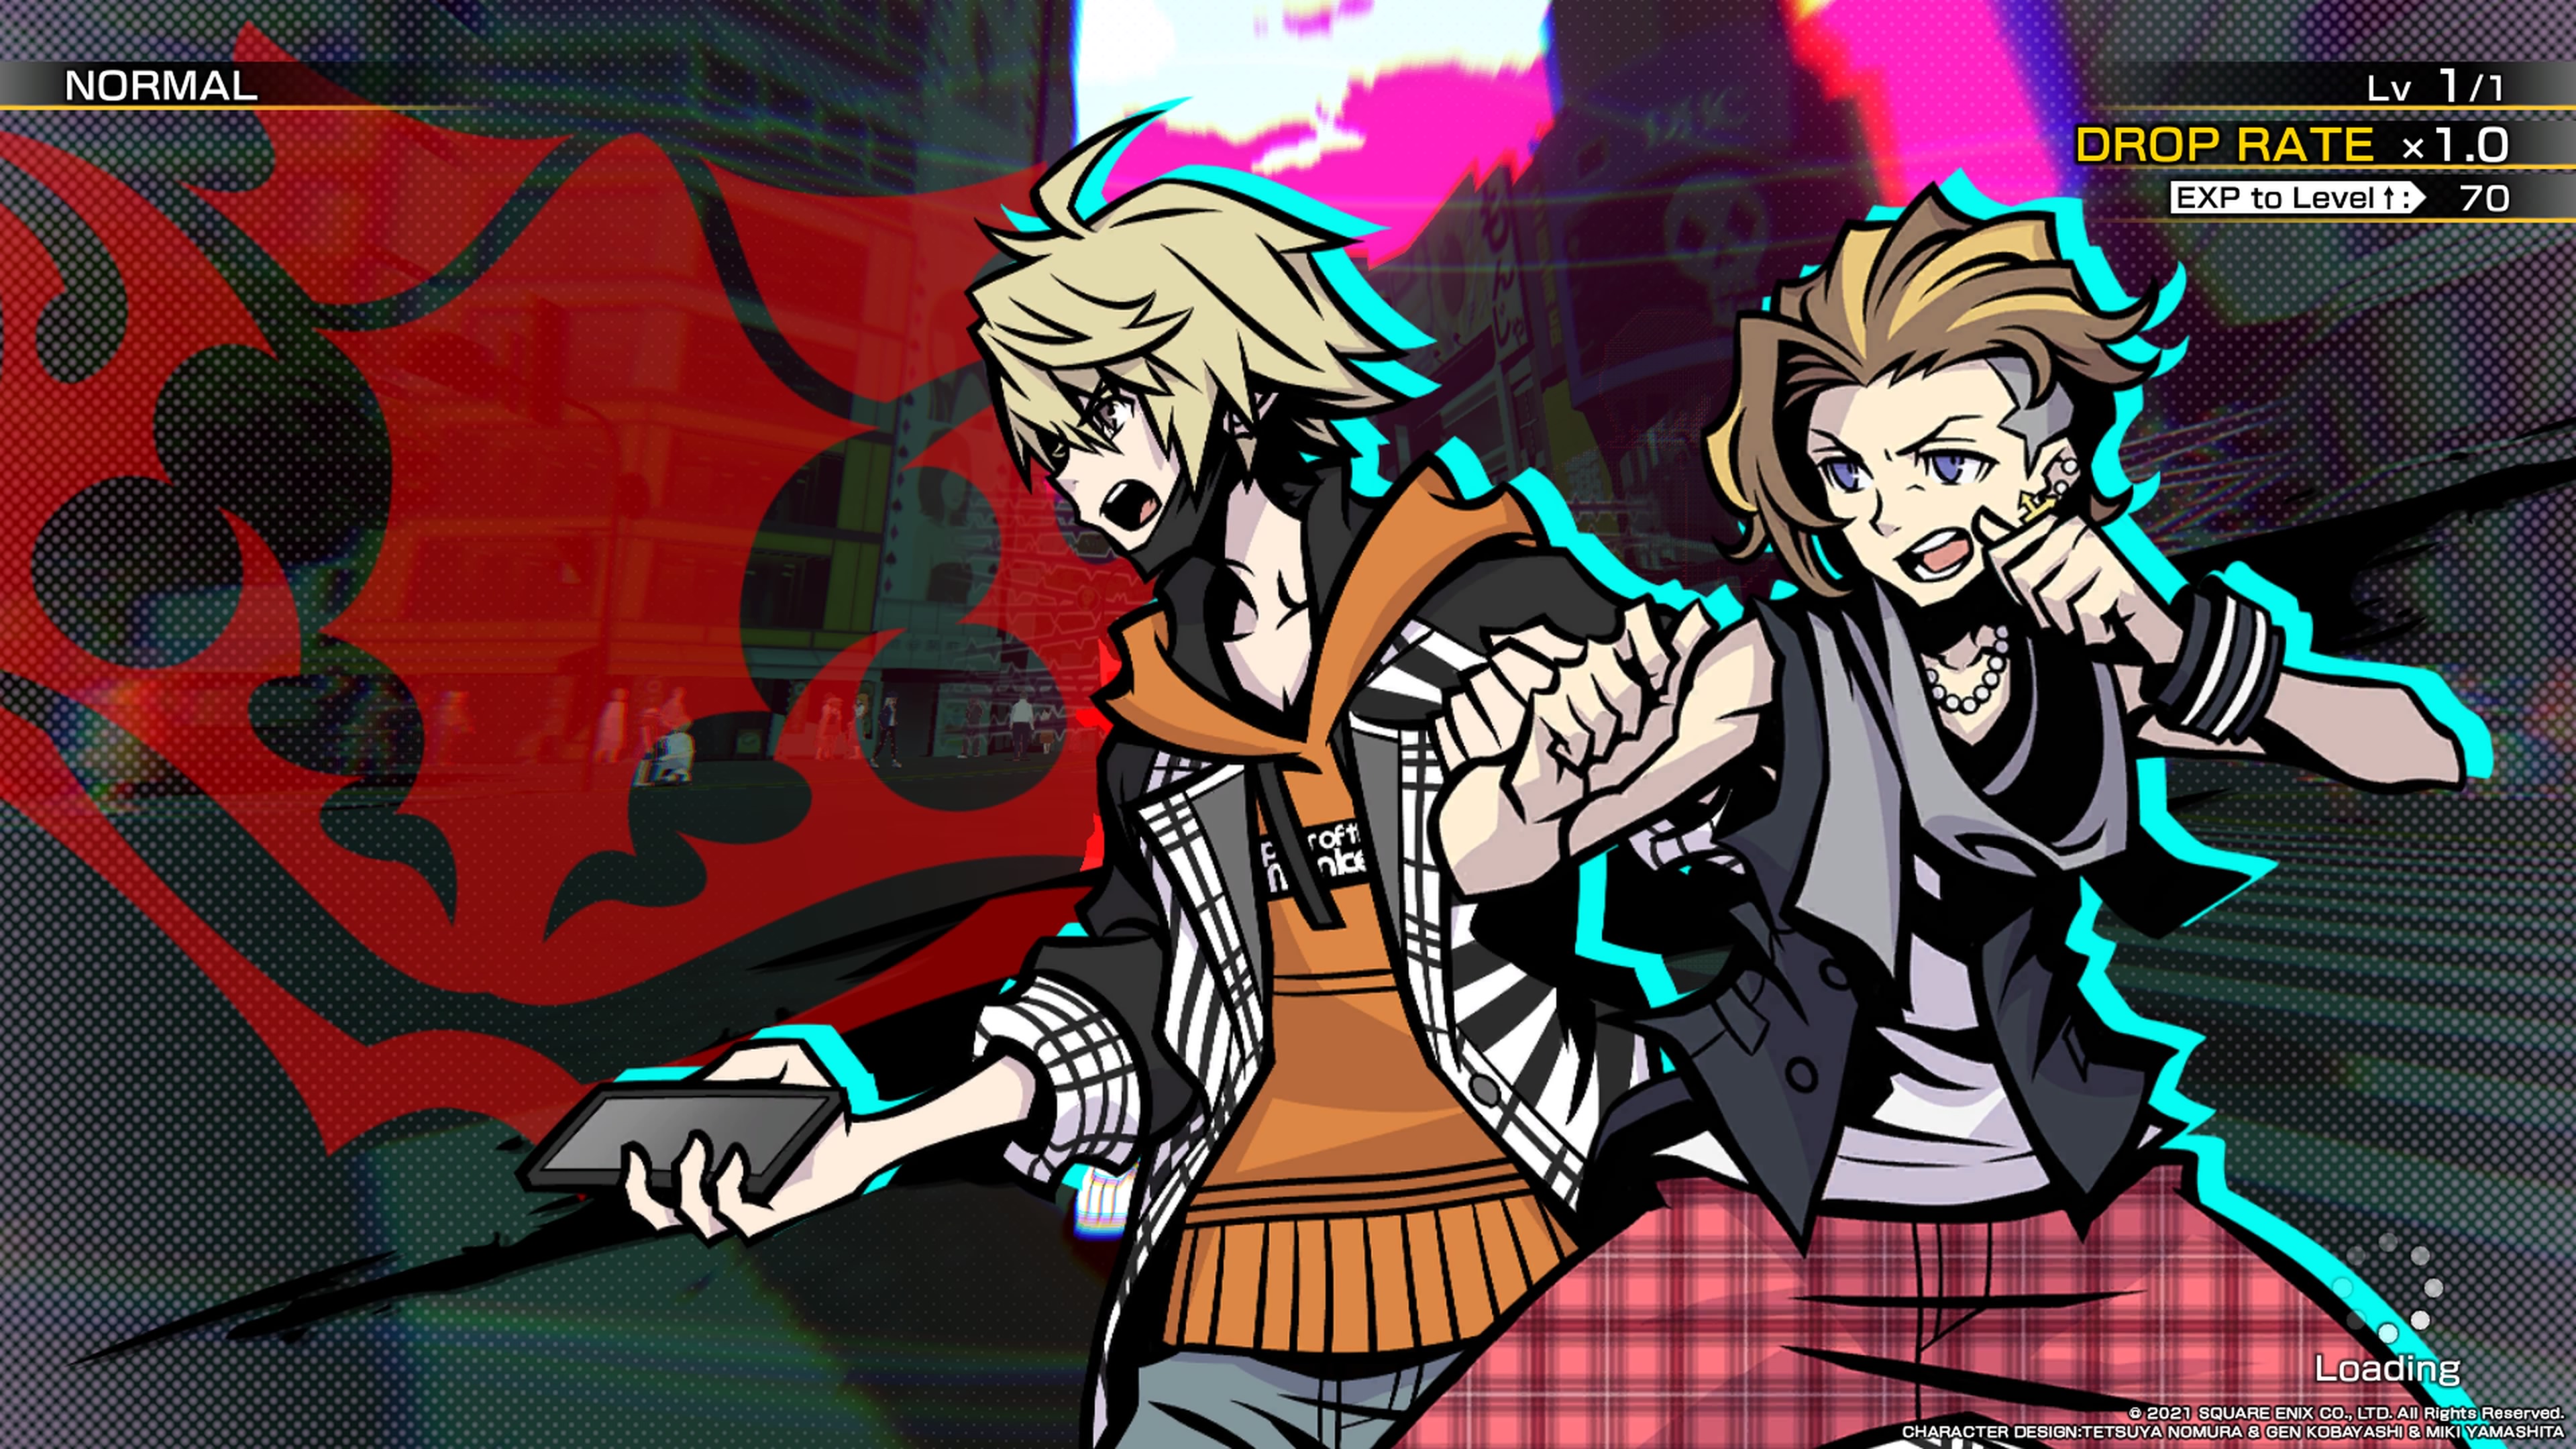 Neo The World Ends With You PS4 Review #55